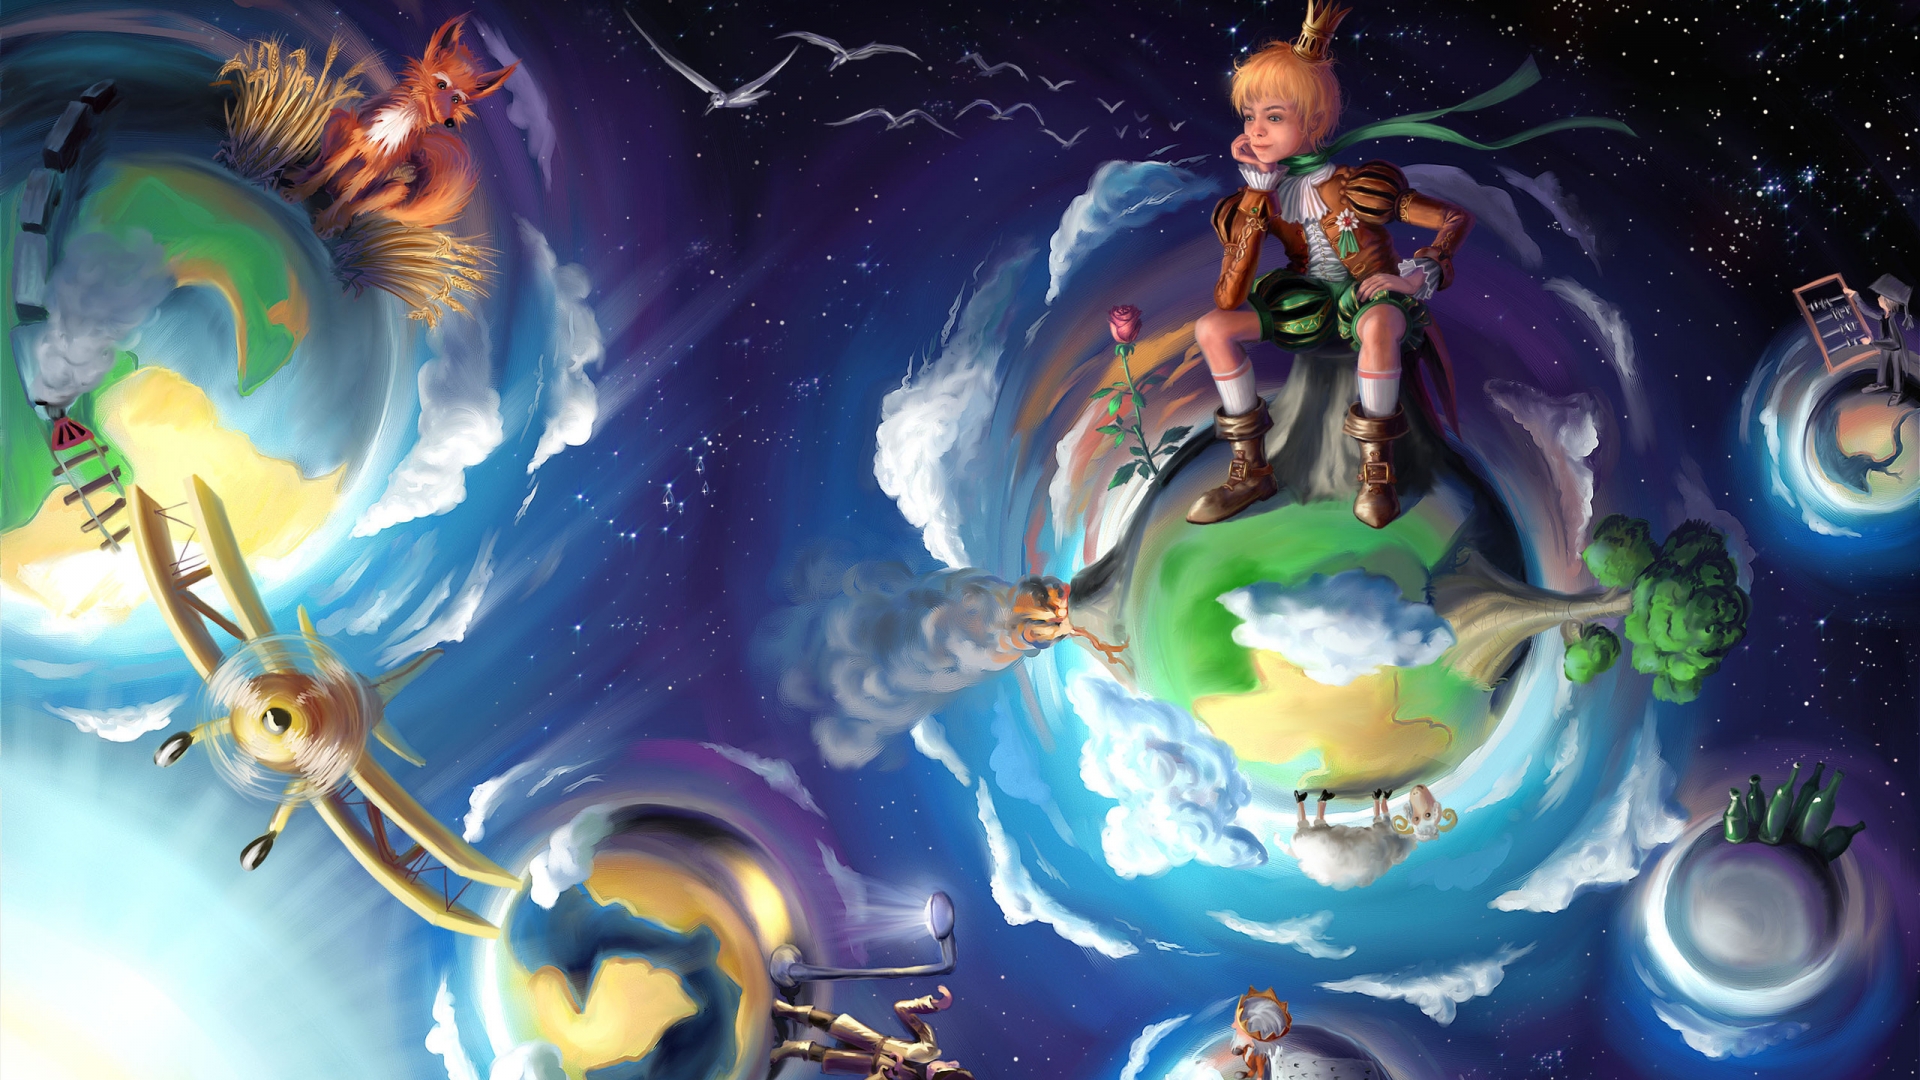 Little Prince for 1920 x 1080 HDTV 1080p resolution